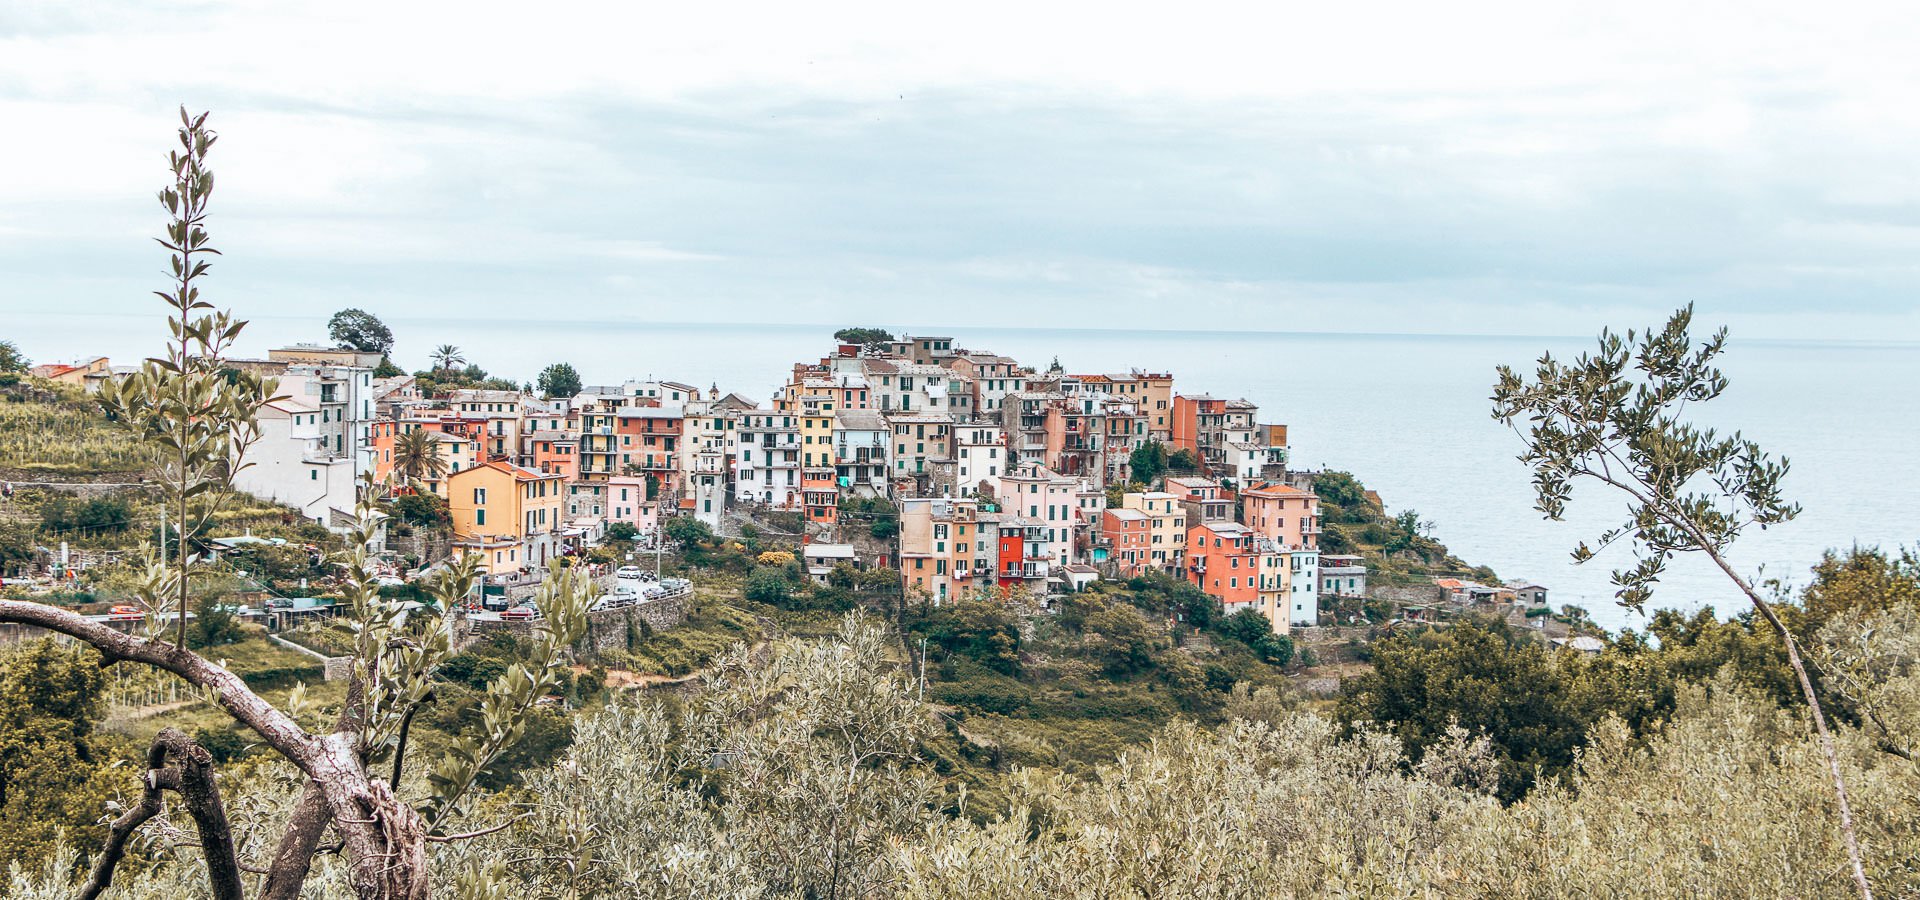 How To Spend 3 Days In Cinque Terre | how to spend 3 days in cinque terre 1